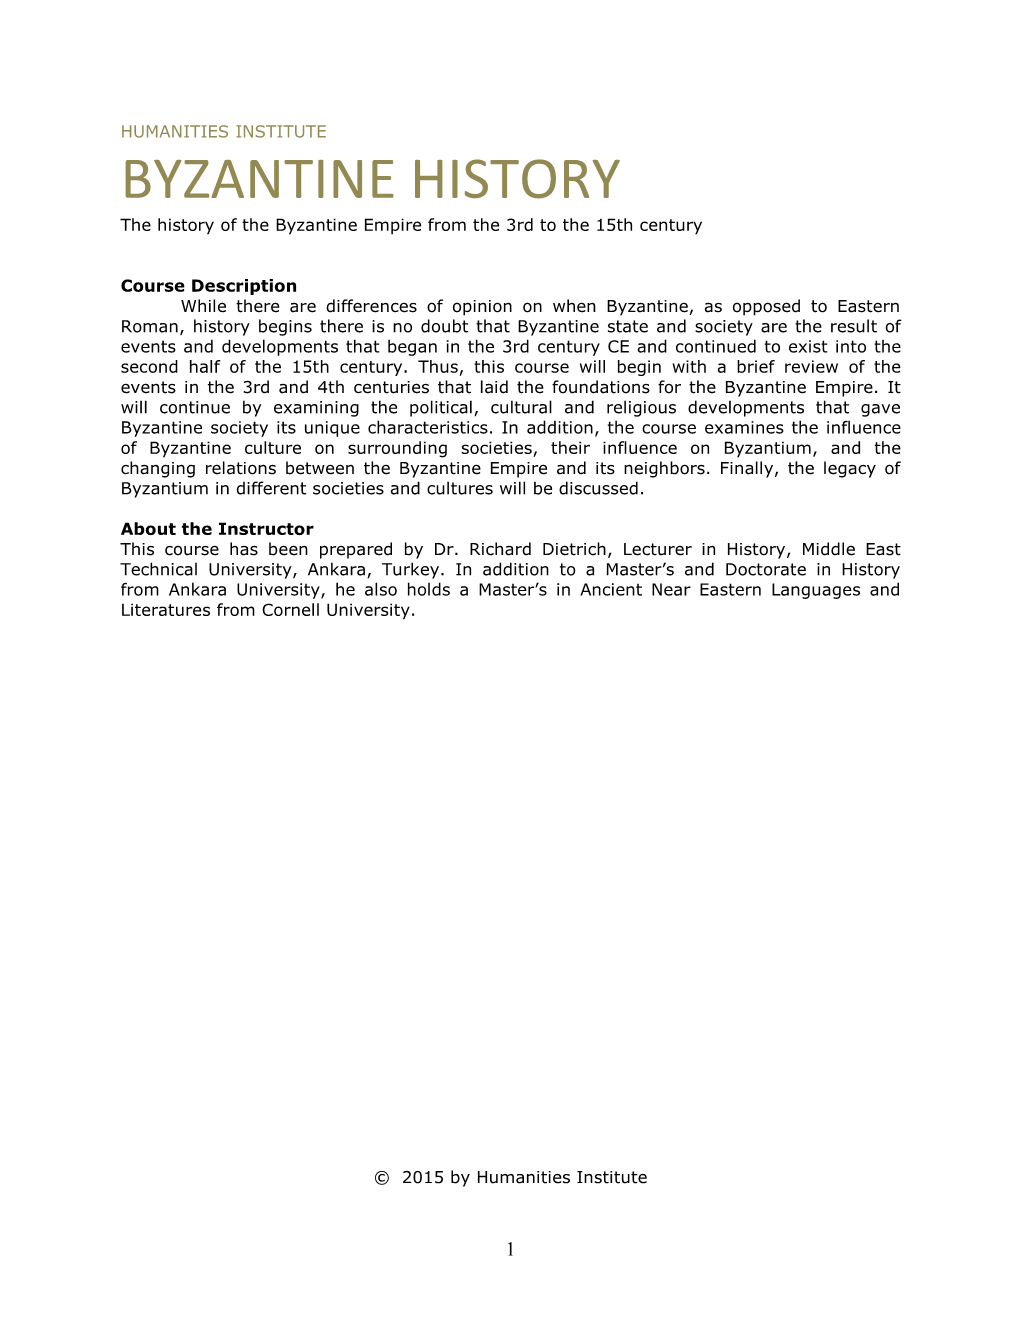 BYZANTINE HISTORY the History of the Byzantine Empire from the 3Rd to the 15Th Century